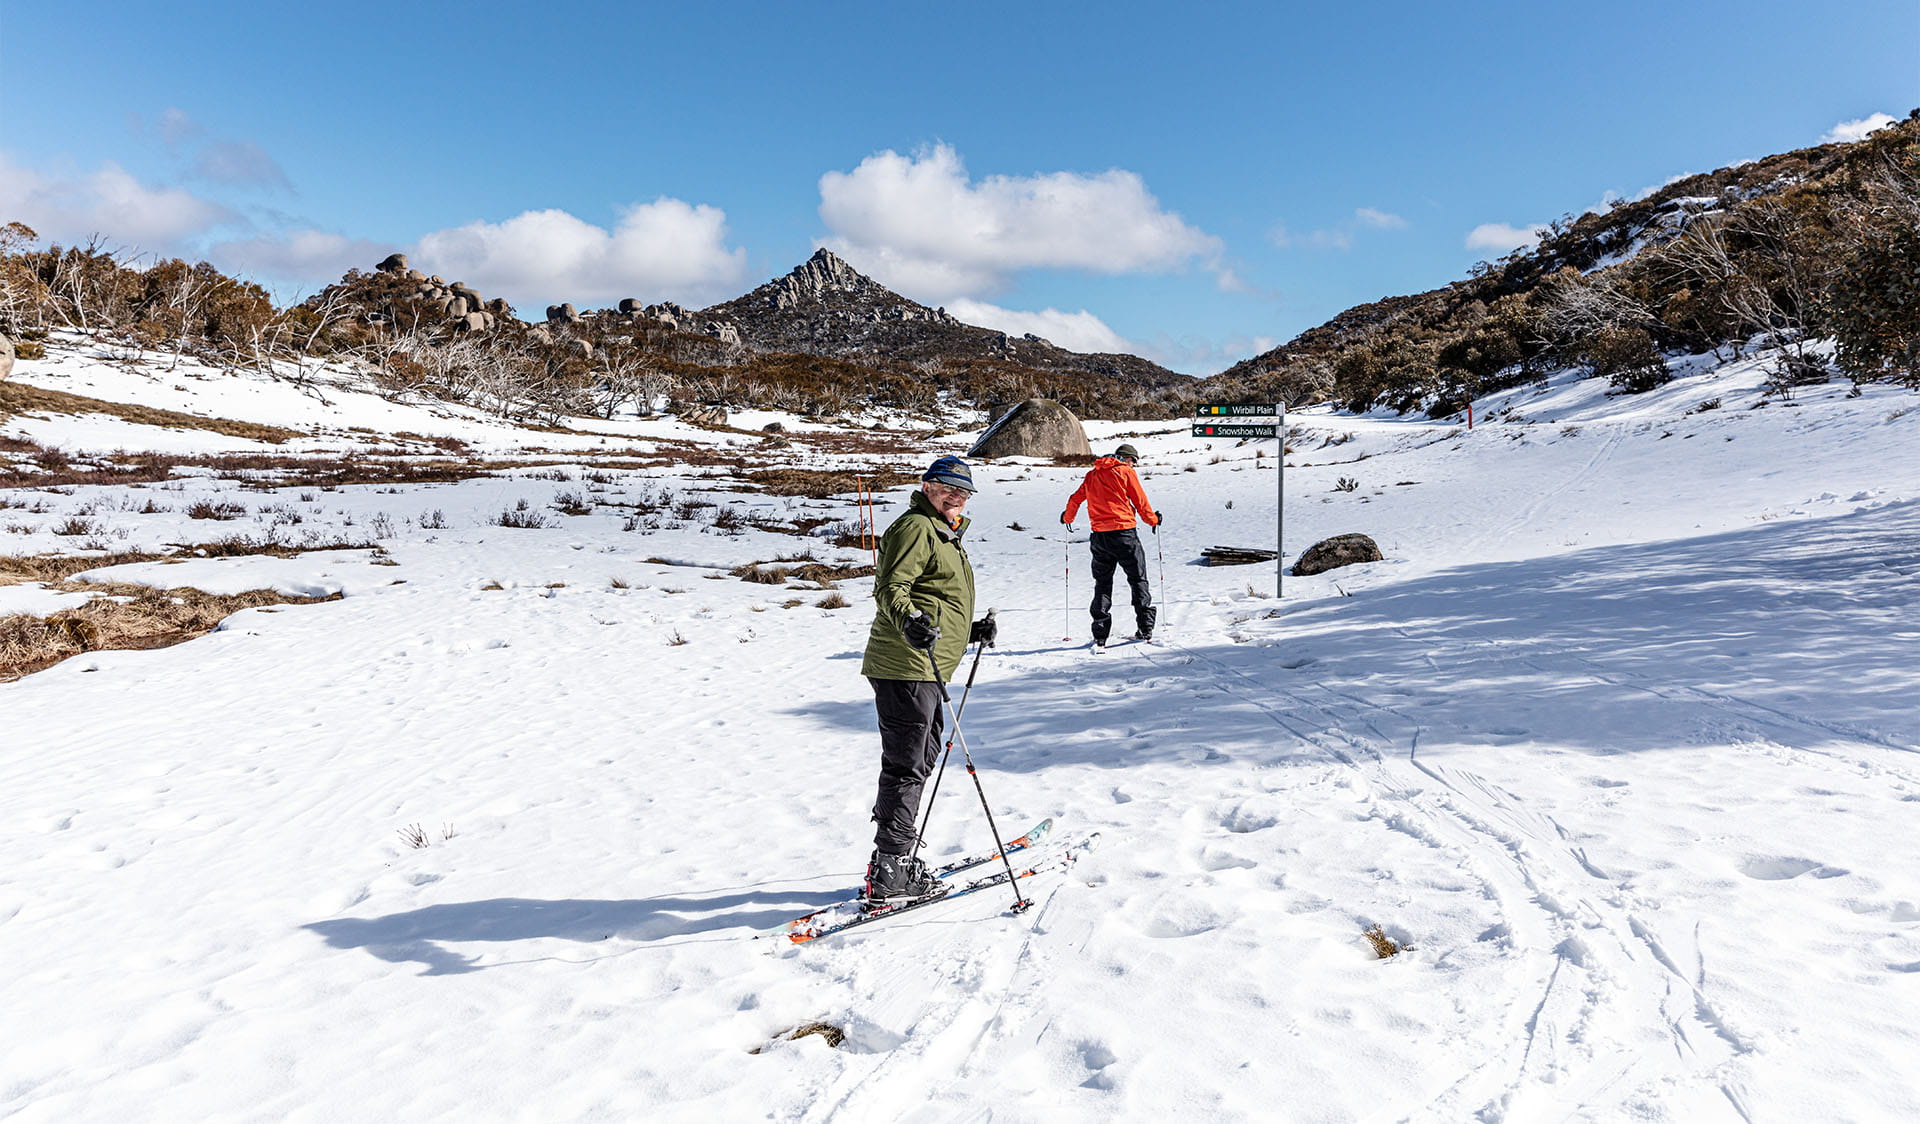 Two people cross country skiing at Cresta Valley in Mount Buffalo National Park.